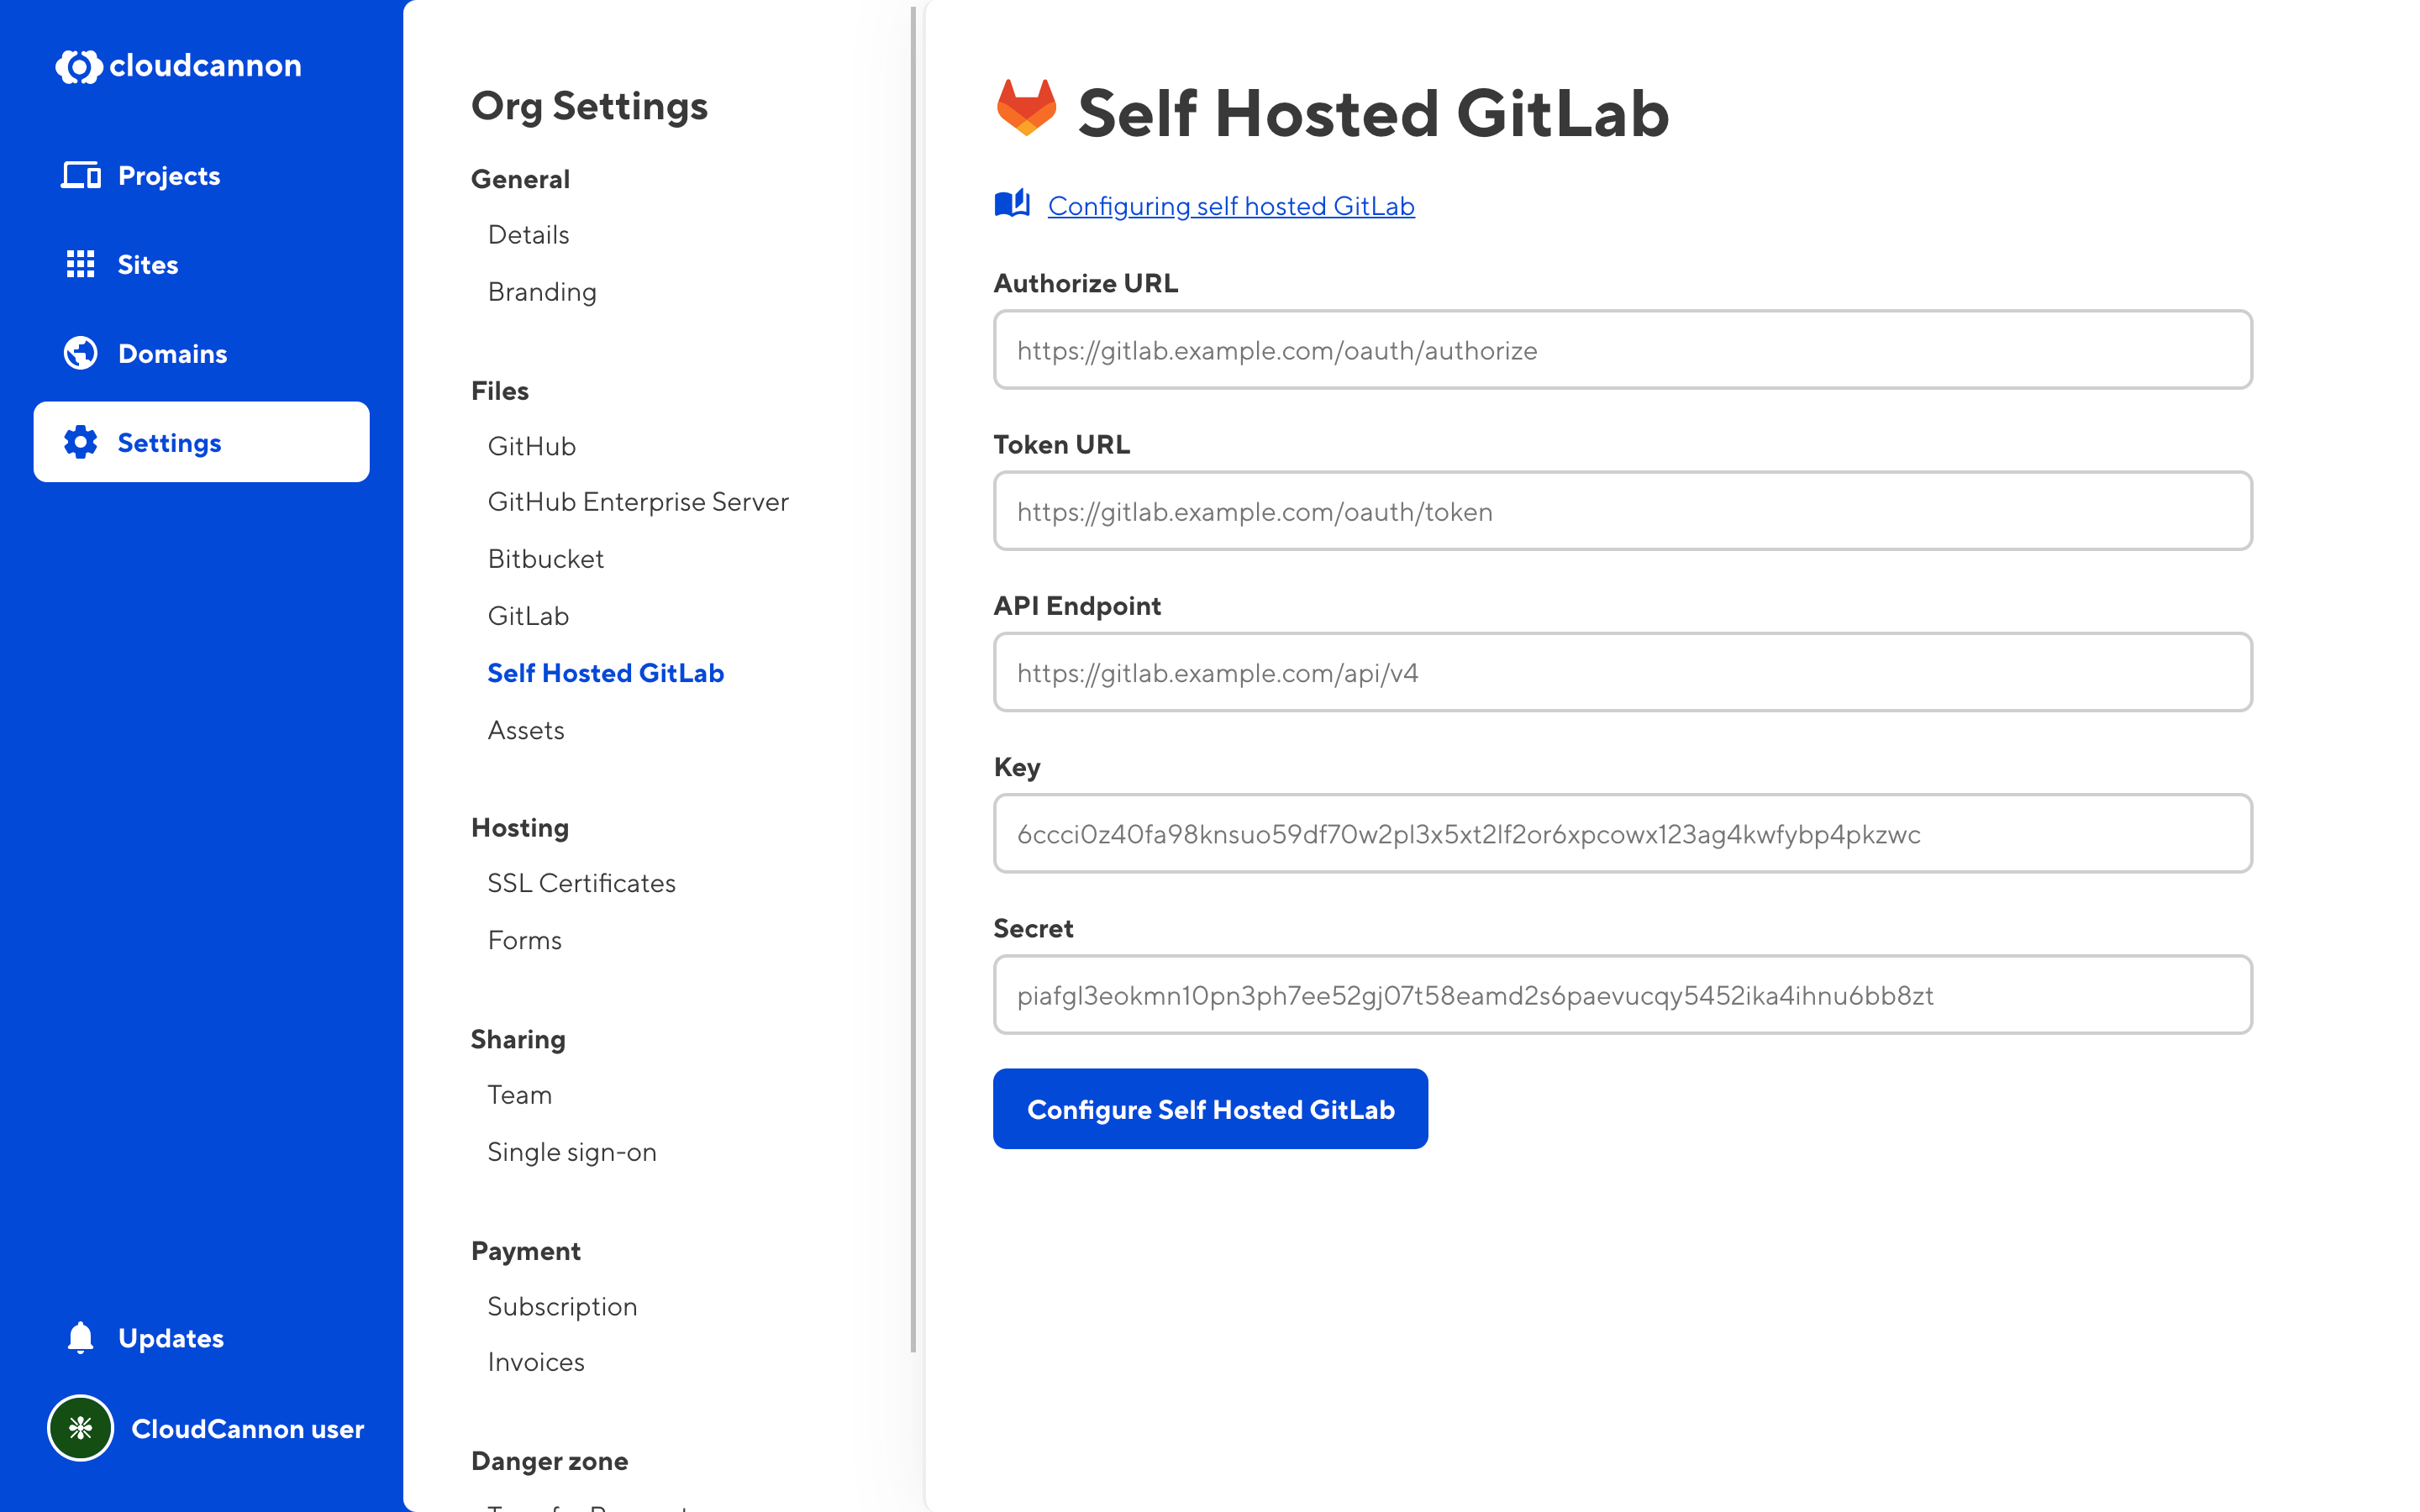 Self hosted GitLab entry interface